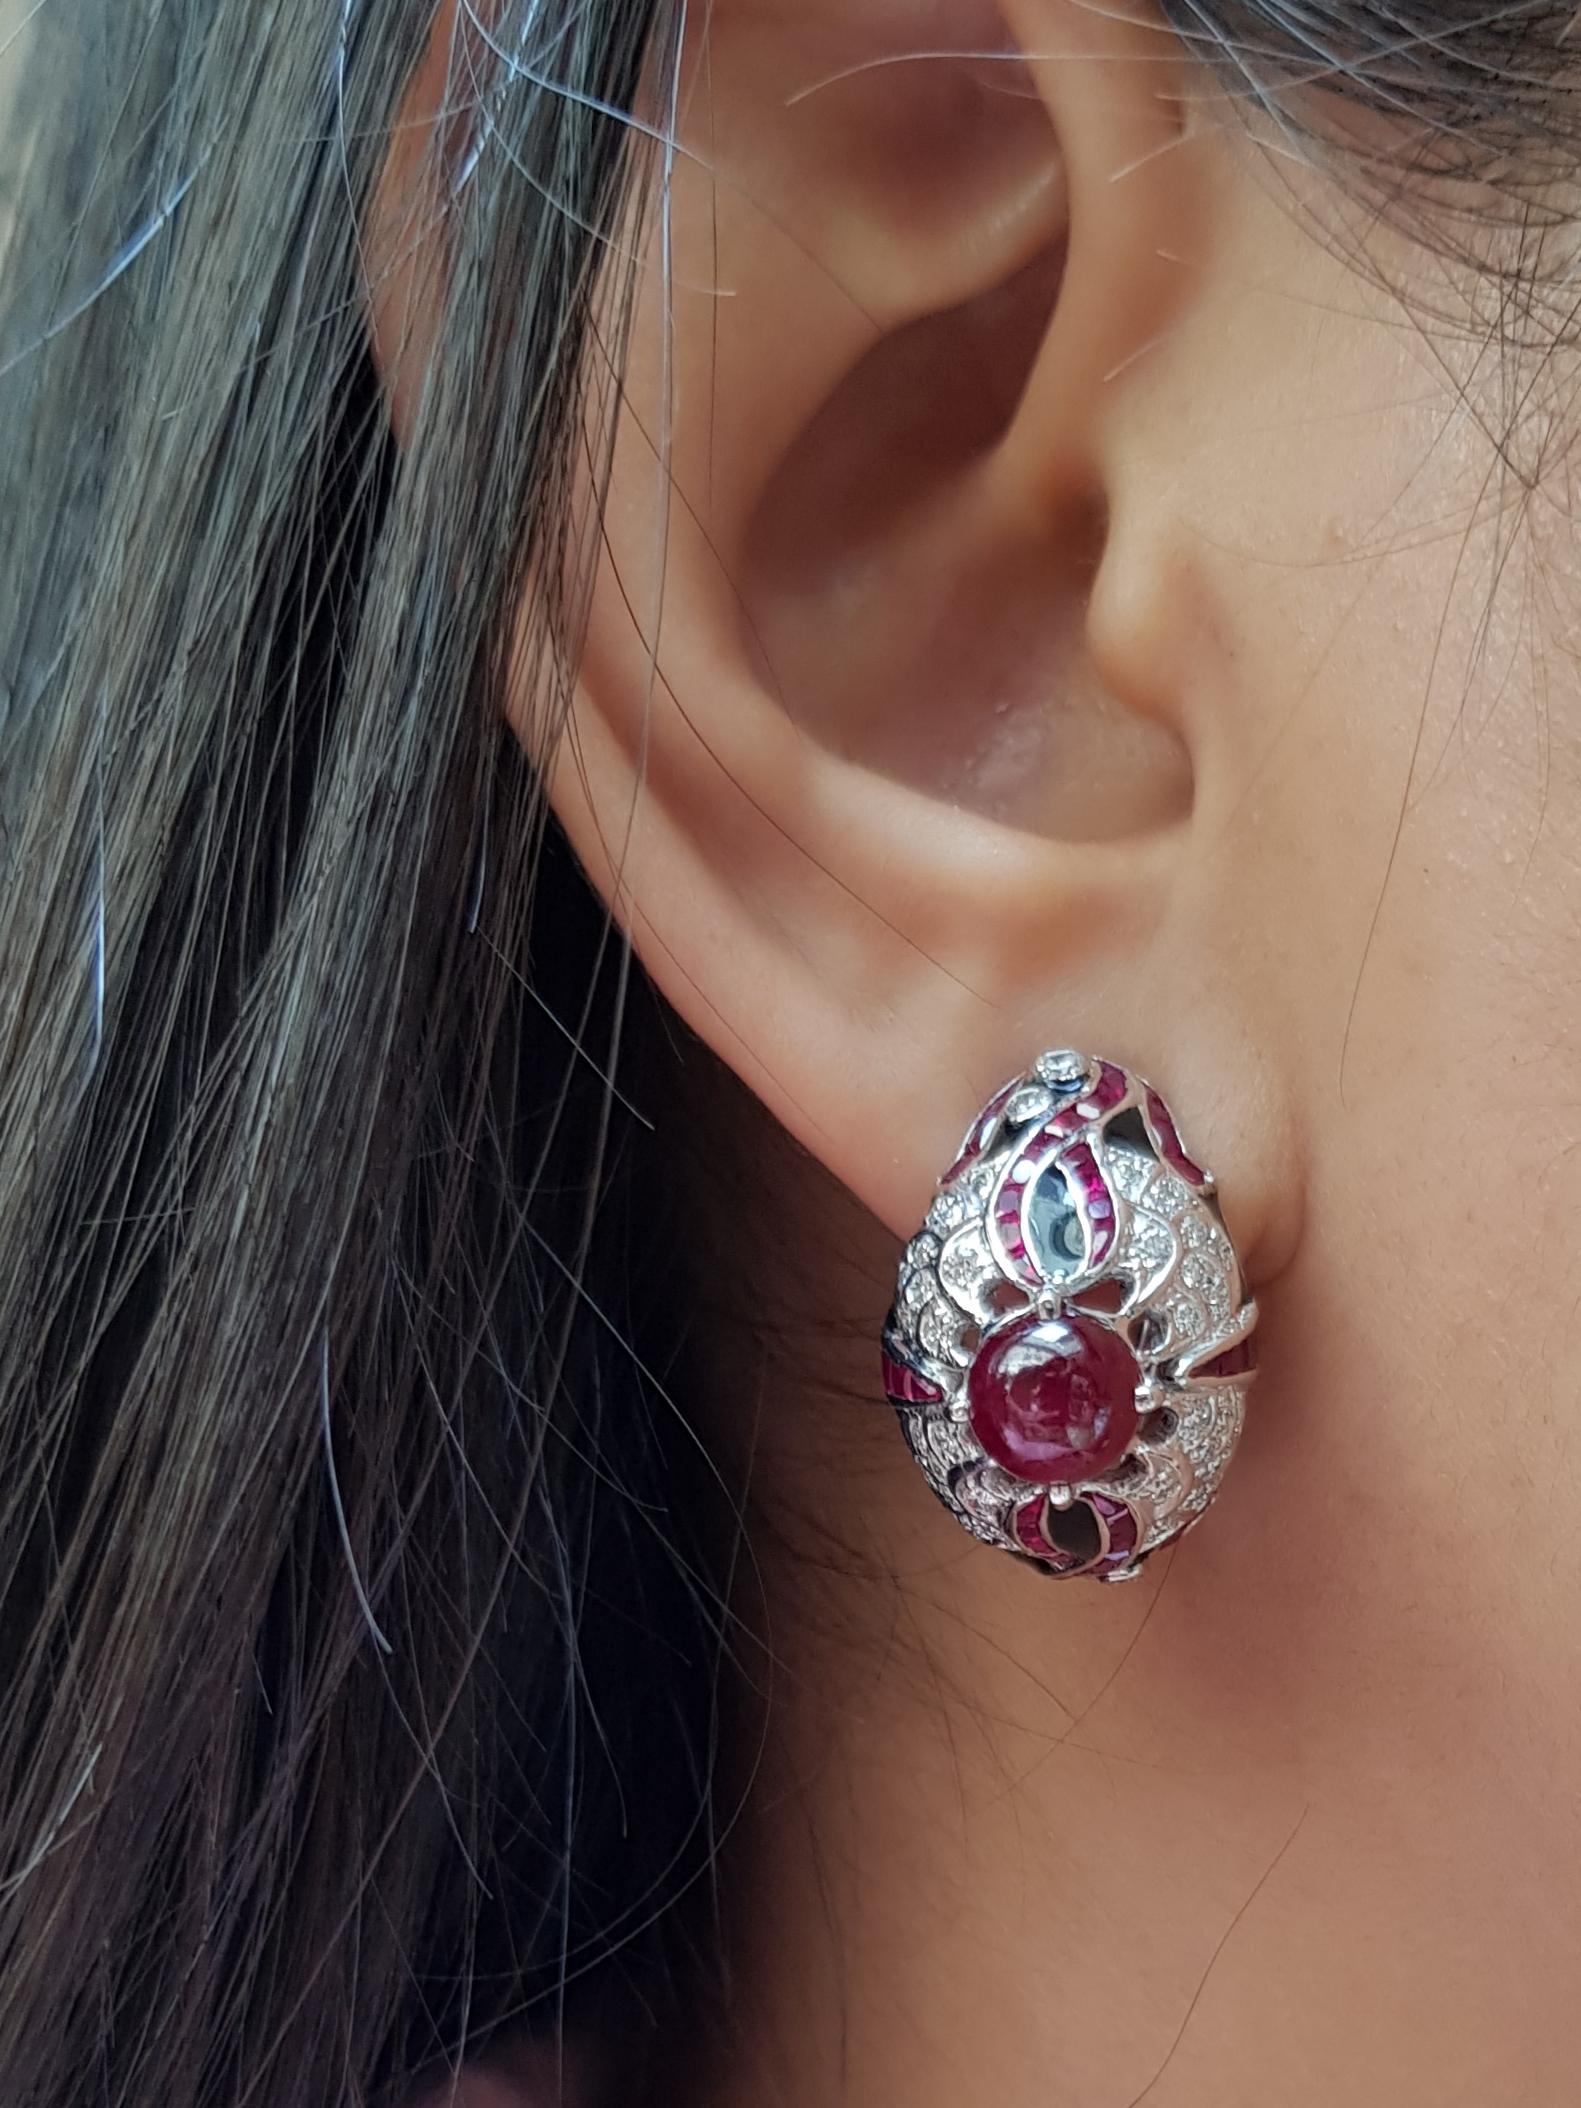 Cabochon Ruby 4.05 carat with Ruby 7.14 carats and Diamond 1.04 carats Earrings set in 18 Karat White Gold Settings

Width: 2.2 cm
Length: 2.5 cm 

